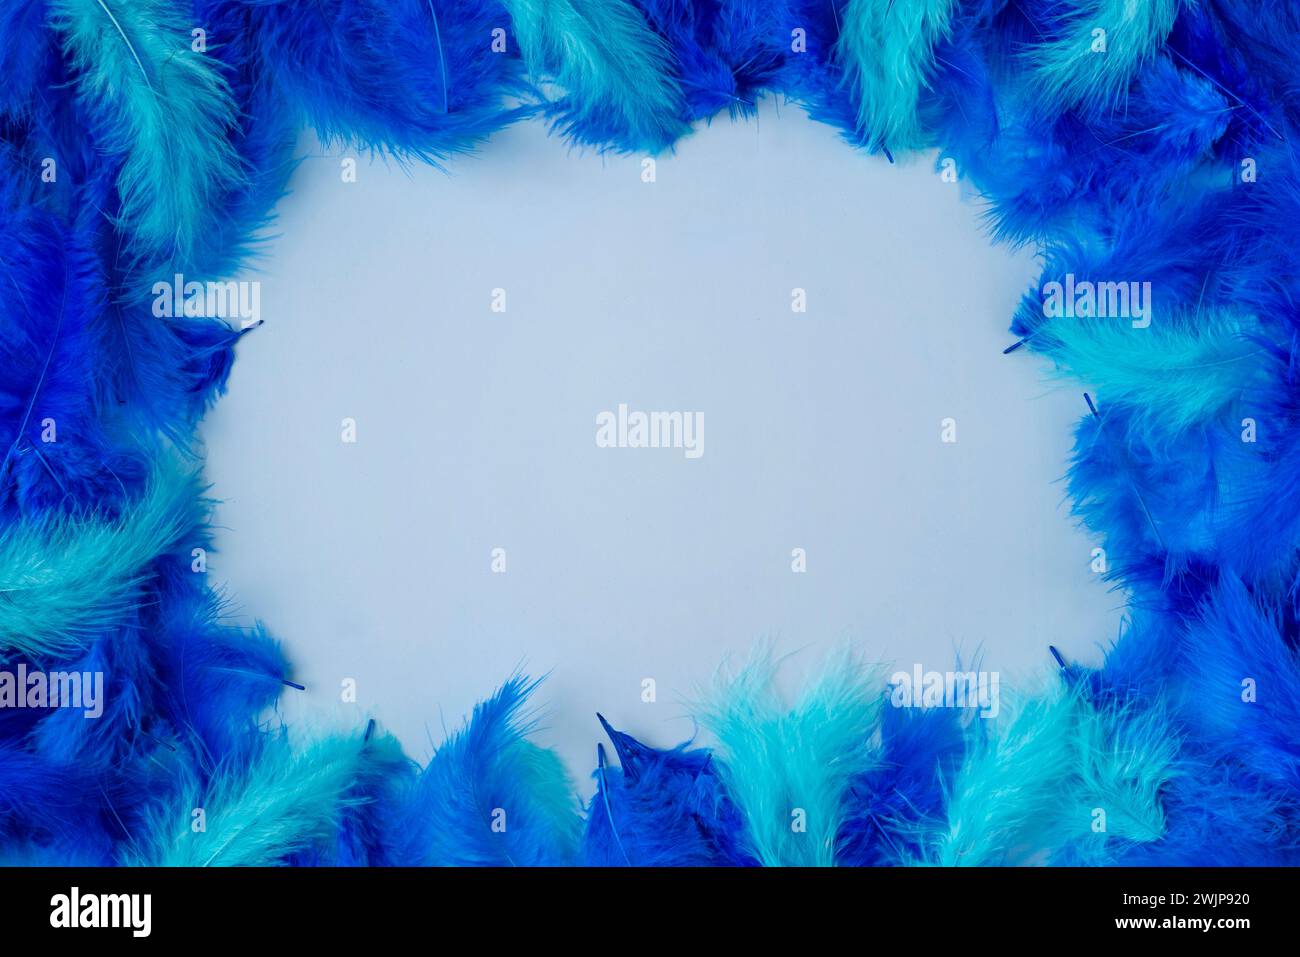 Frame made of blue and turquoise feathers on a light blue background Stock Photo